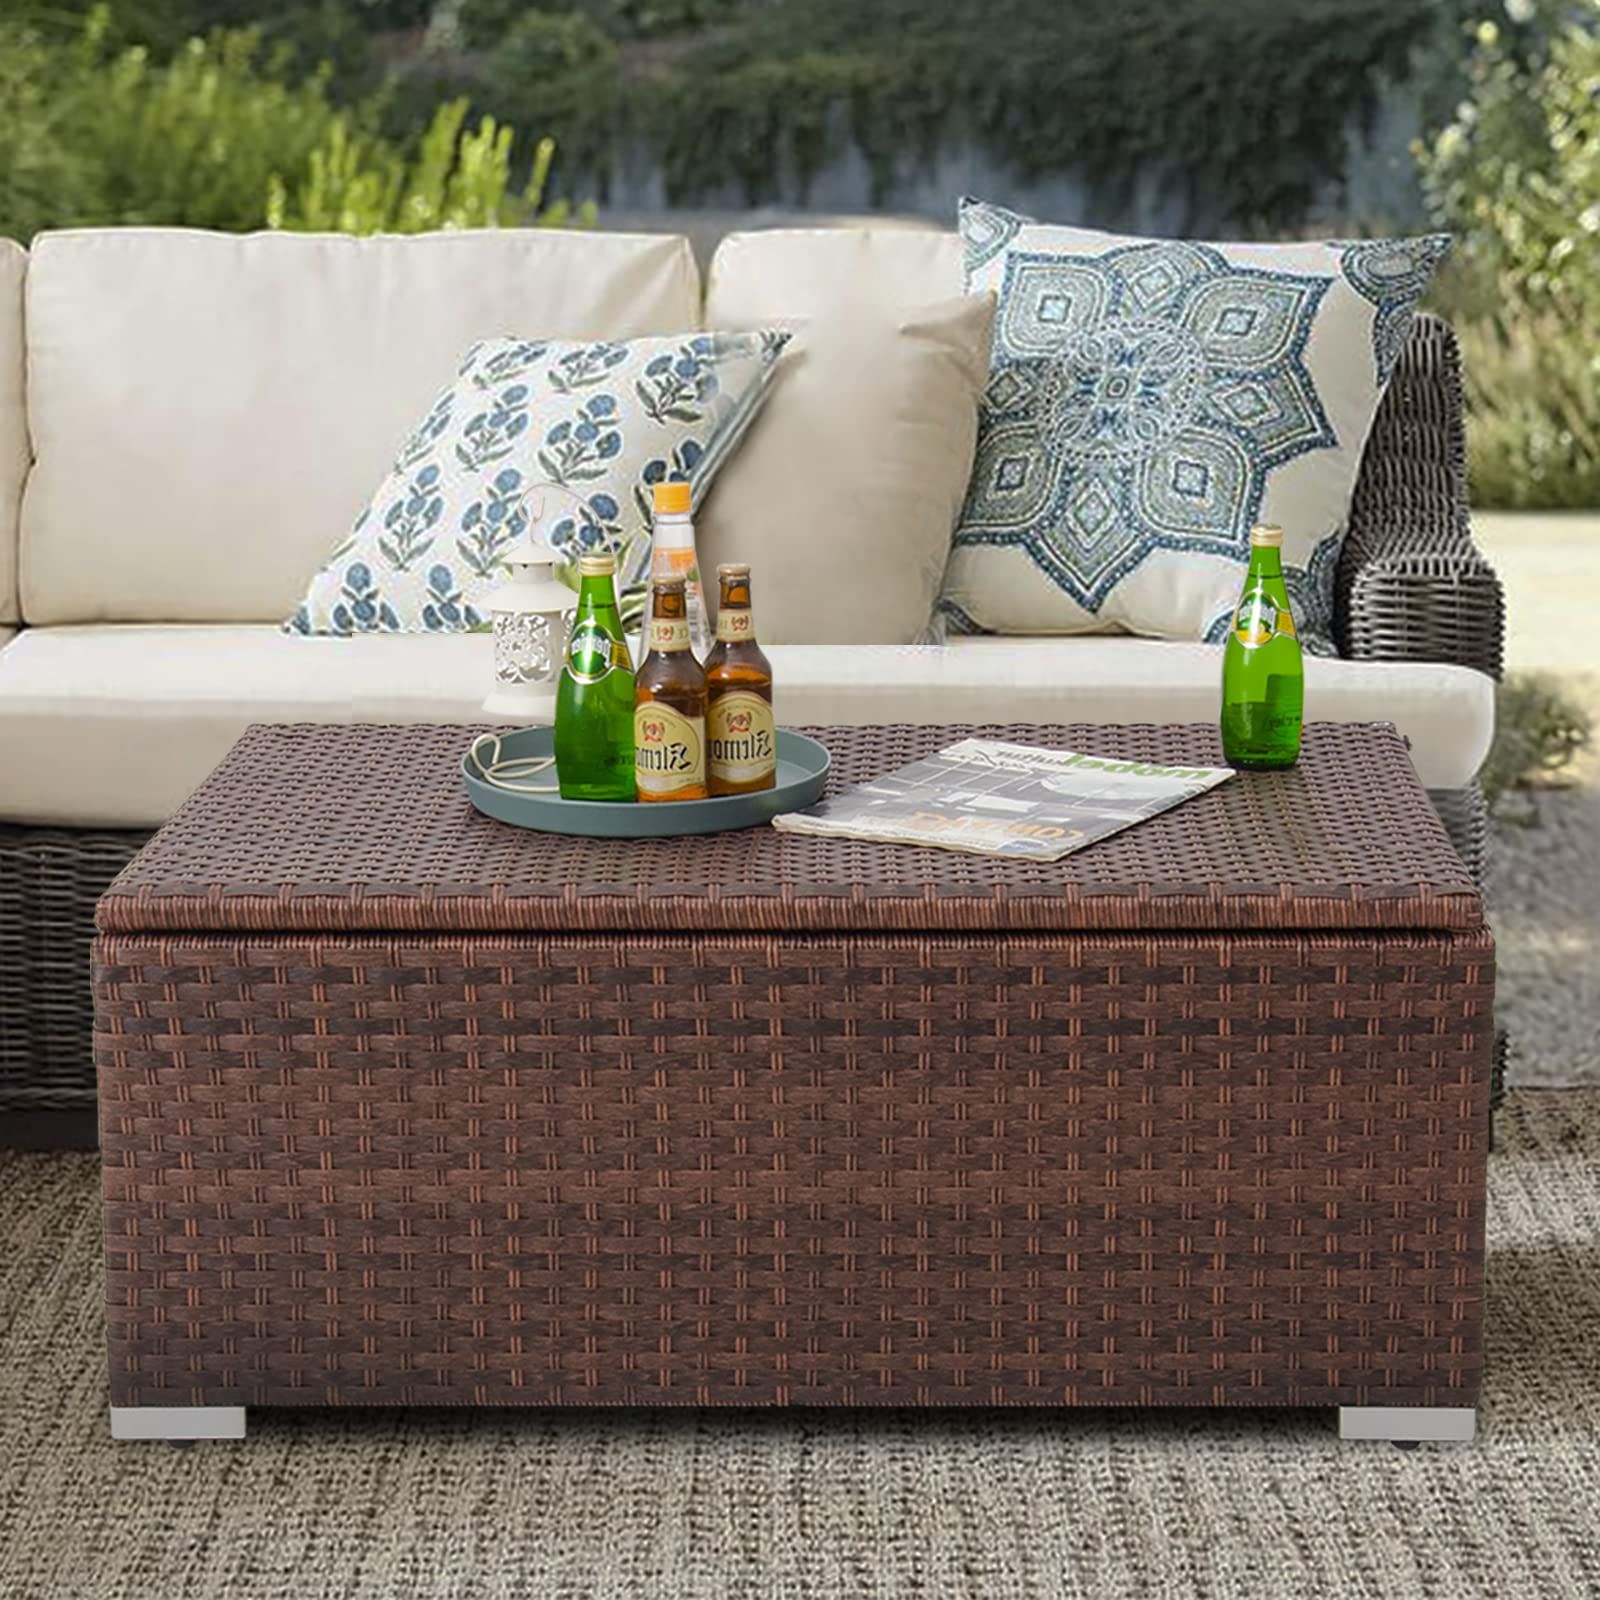 Amazon: Dimar Garden Outdoor Storage Coffee Table With Waterproof Cover, Patio Wicker Storage Table,42 Gallon Mixed Brown : Patio, Lawn & Garden Intended For Recent Storage Table For Backyard, Garden, Porch (Photo 3 of 15)